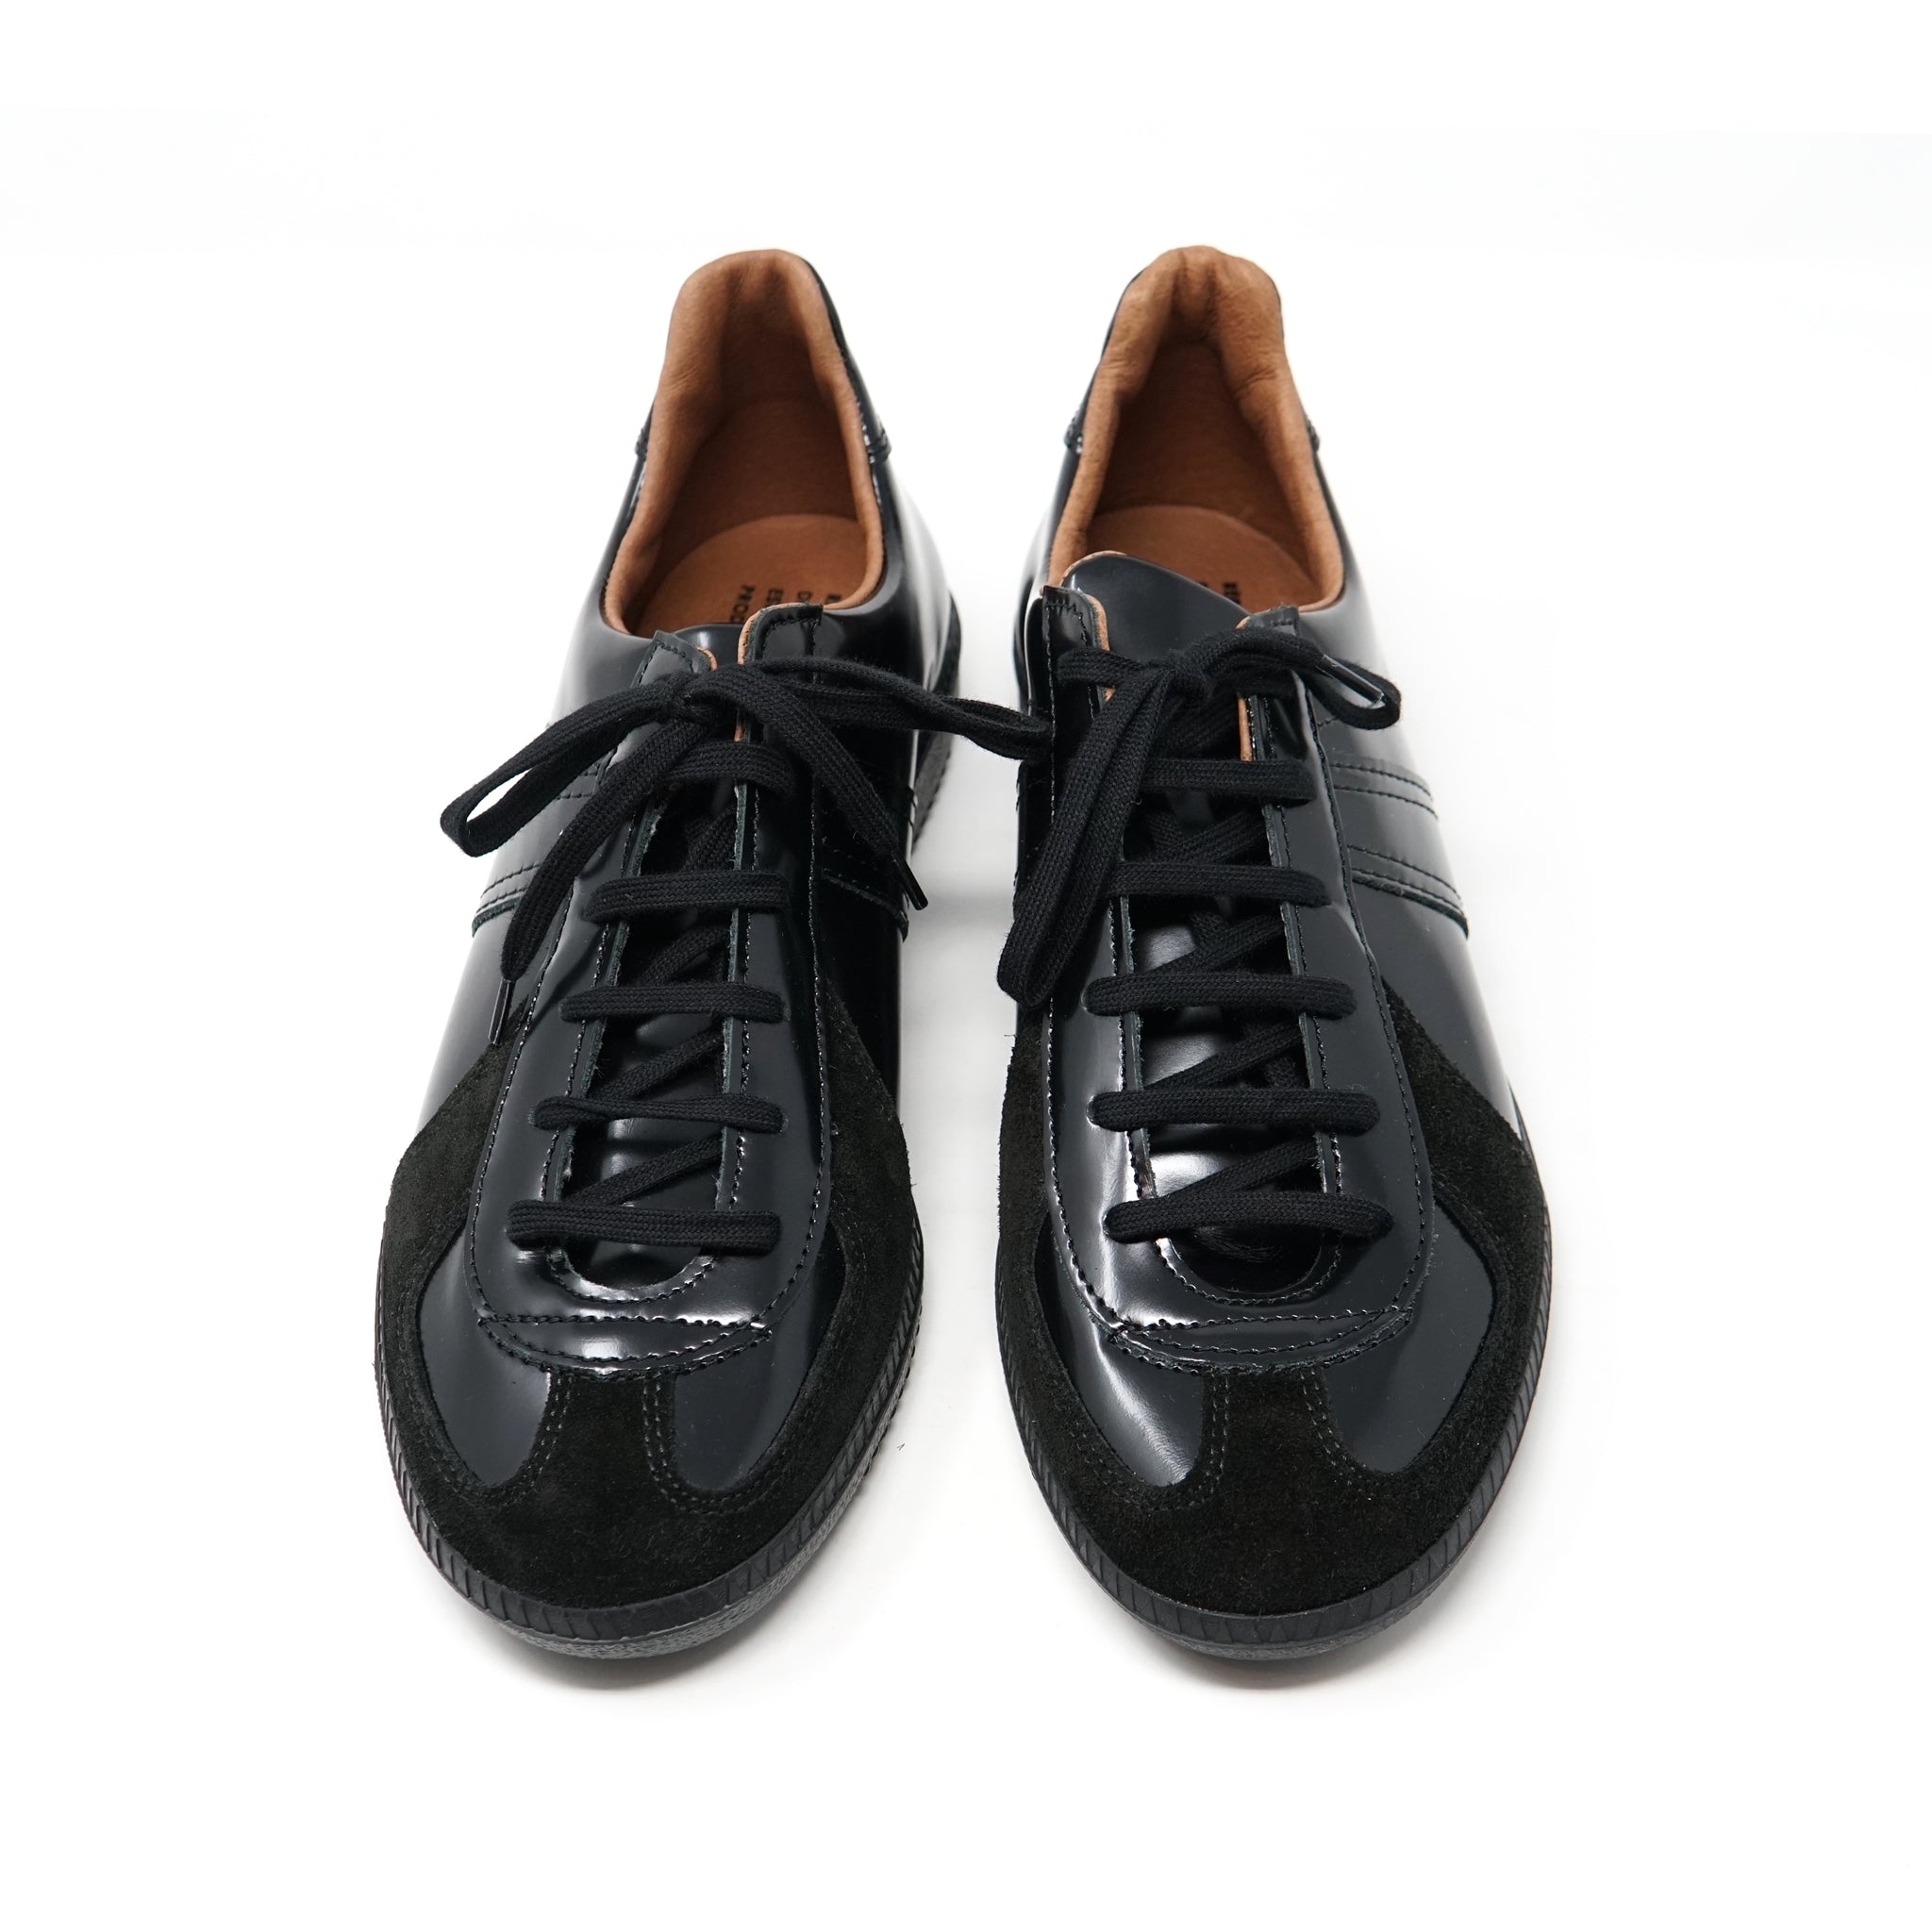 No:1700lux | Name:GERMAN MILITARY TRAINER | Color:Black